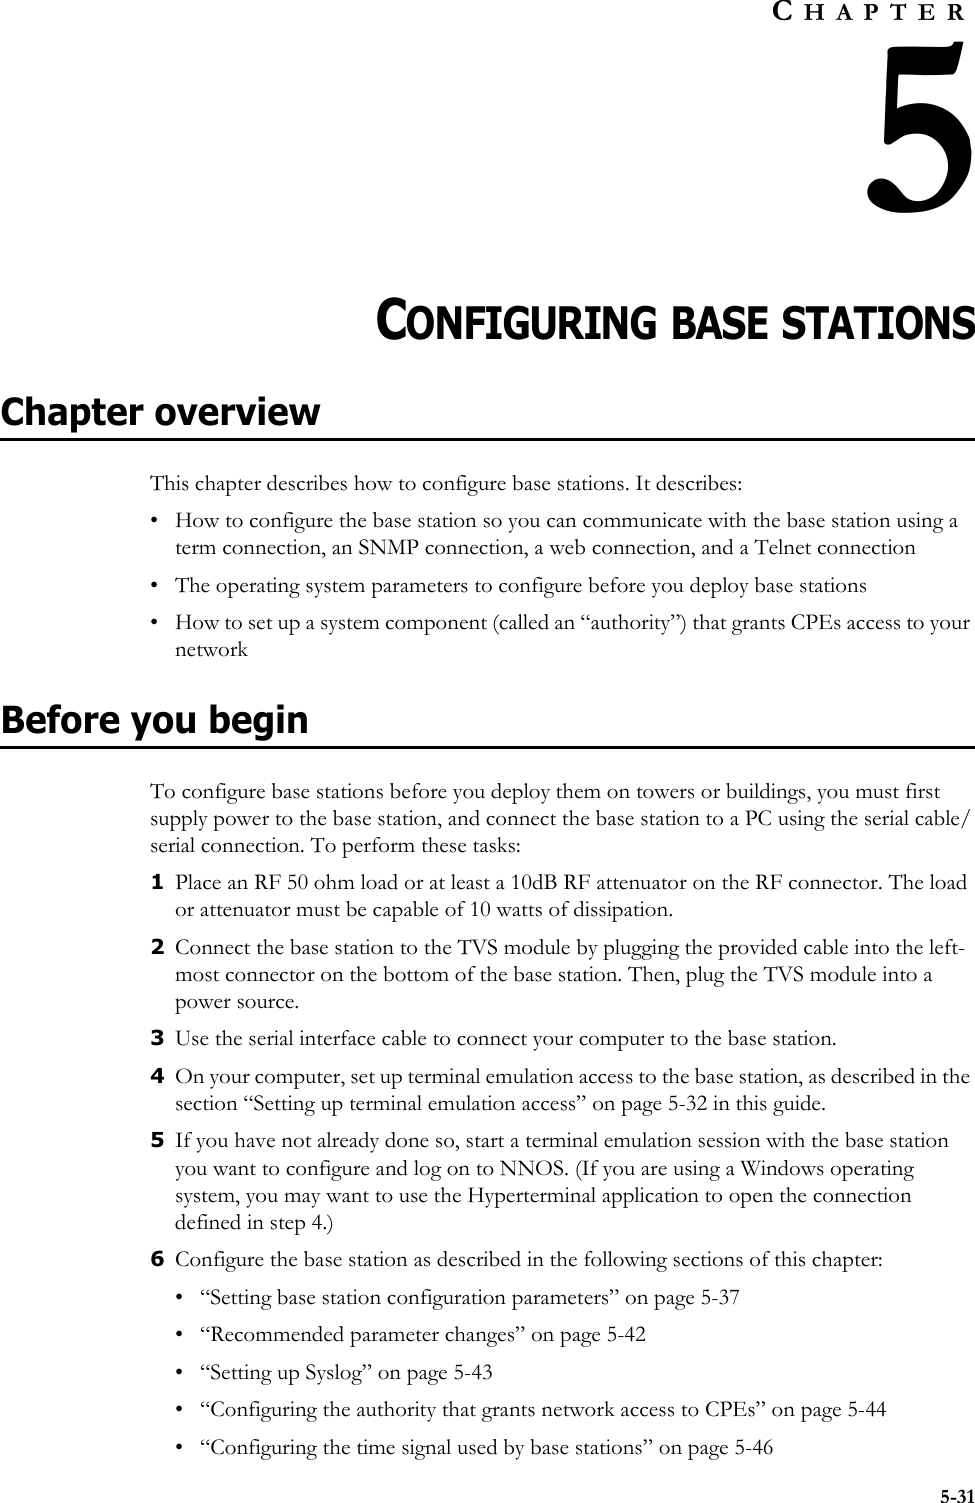 5-31CHAPTER5CHAPTER 5CONFIGURING BASE STATIONSChapter overviewThis chapter describes how to configure base stations. It describes:• How to configure the base station so you can communicate with the base station using a term connection, an SNMP connection, a web connection, and a Telnet connection• The operating system parameters to configure before you deploy base stations• How to set up a system component (called an “authority”) that grants CPEs access to your networkBefore you beginTo configure base stations before you deploy them on towers or buildings, you must first supply power to the base station, and connect the base station to a PC using the serial cable/serial connection. To perform these tasks:1Place an RF 50 ohm load or at least a 10dB RF attenuator on the RF connector. The load or attenuator must be capable of 10 watts of dissipation. 2Connect the base station to the TVS module by plugging the provided cable into the left-most connector on the bottom of the base station. Then, plug the TVS module into a power source.3Use the serial interface cable to connect your computer to the base station. 4On your computer, set up terminal emulation access to the base station, as described in the section “Setting up terminal emulation access” on page 5-32 in this guide. 5If you have not already done so, start a terminal emulation session with the base station you want to configure and log on to NNOS. (If you are using a Windows operating system, you may want to use the Hyperterminal application to open the connection defined in step 4.) 6Configure the base station as described in the following sections of this chapter:• “Setting base station configuration parameters” on page 5-37• “Recommended parameter changes” on page 5-42• “Setting up Syslog” on page 5-43• “Configuring the authority that grants network access to CPEs” on page 5-44• “Configuring the time signal used by base stations” on page 5-46